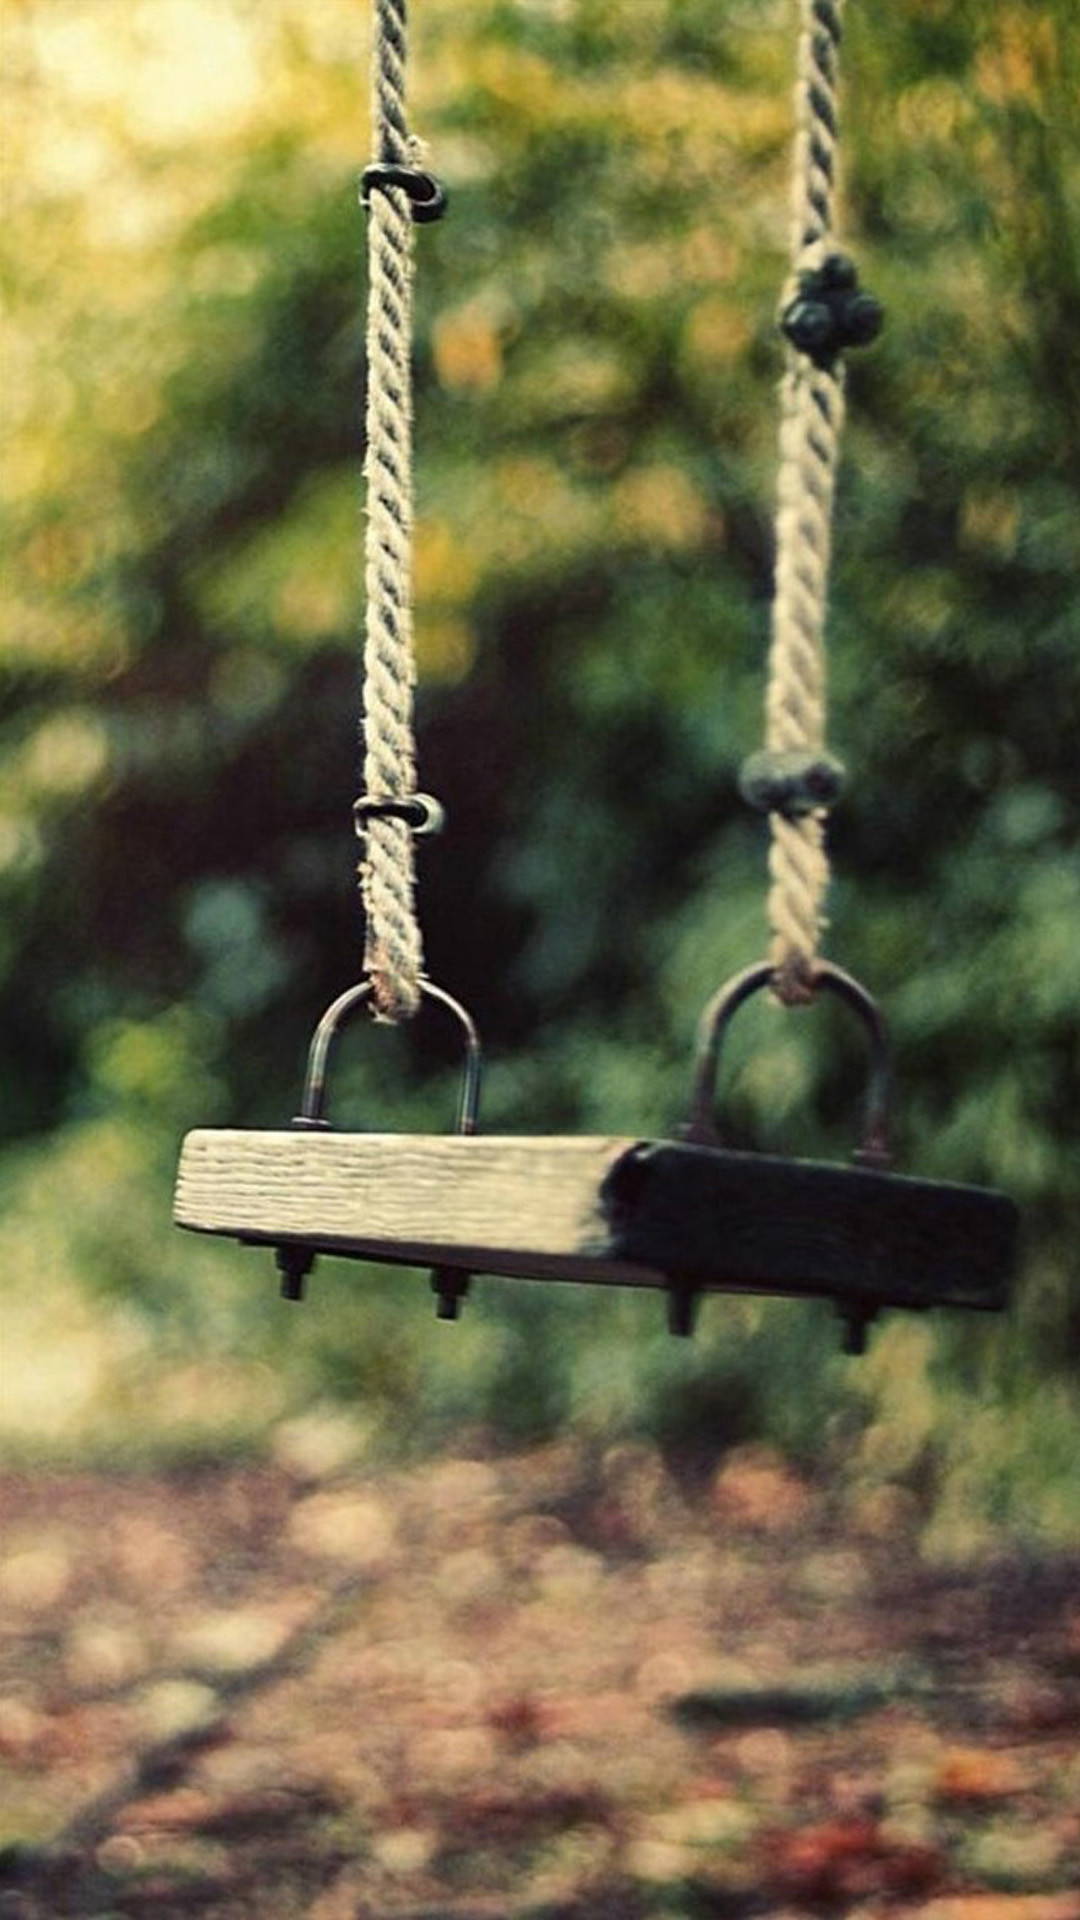 1080x1920 An Old Swing. Tap to see more iPhone Vintage Style Wallpapers! - @mobile9